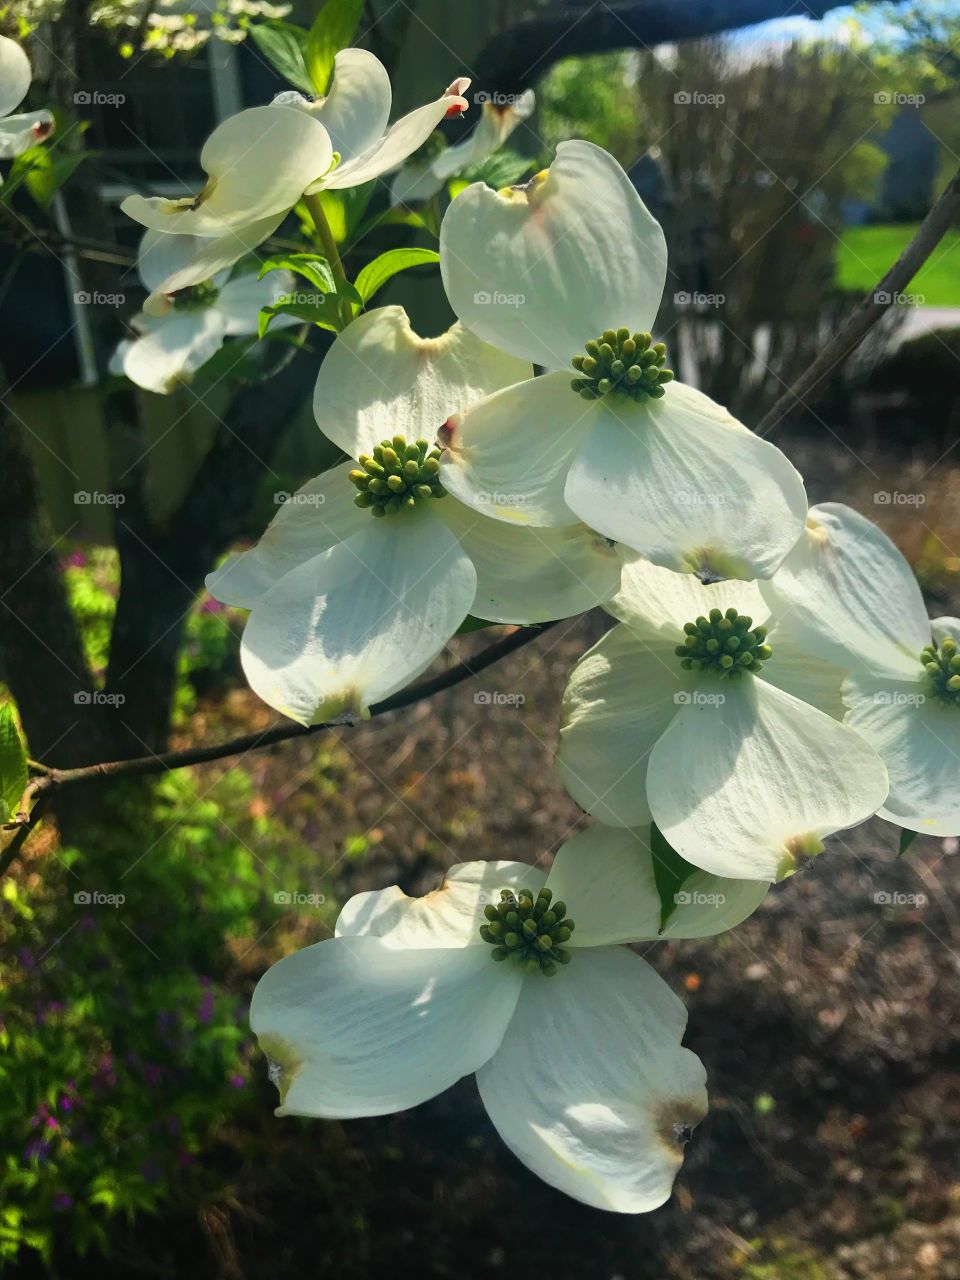 White and green flowers with crisp, clear petals blossoming and hanging from a small tree on a warm summer day. 